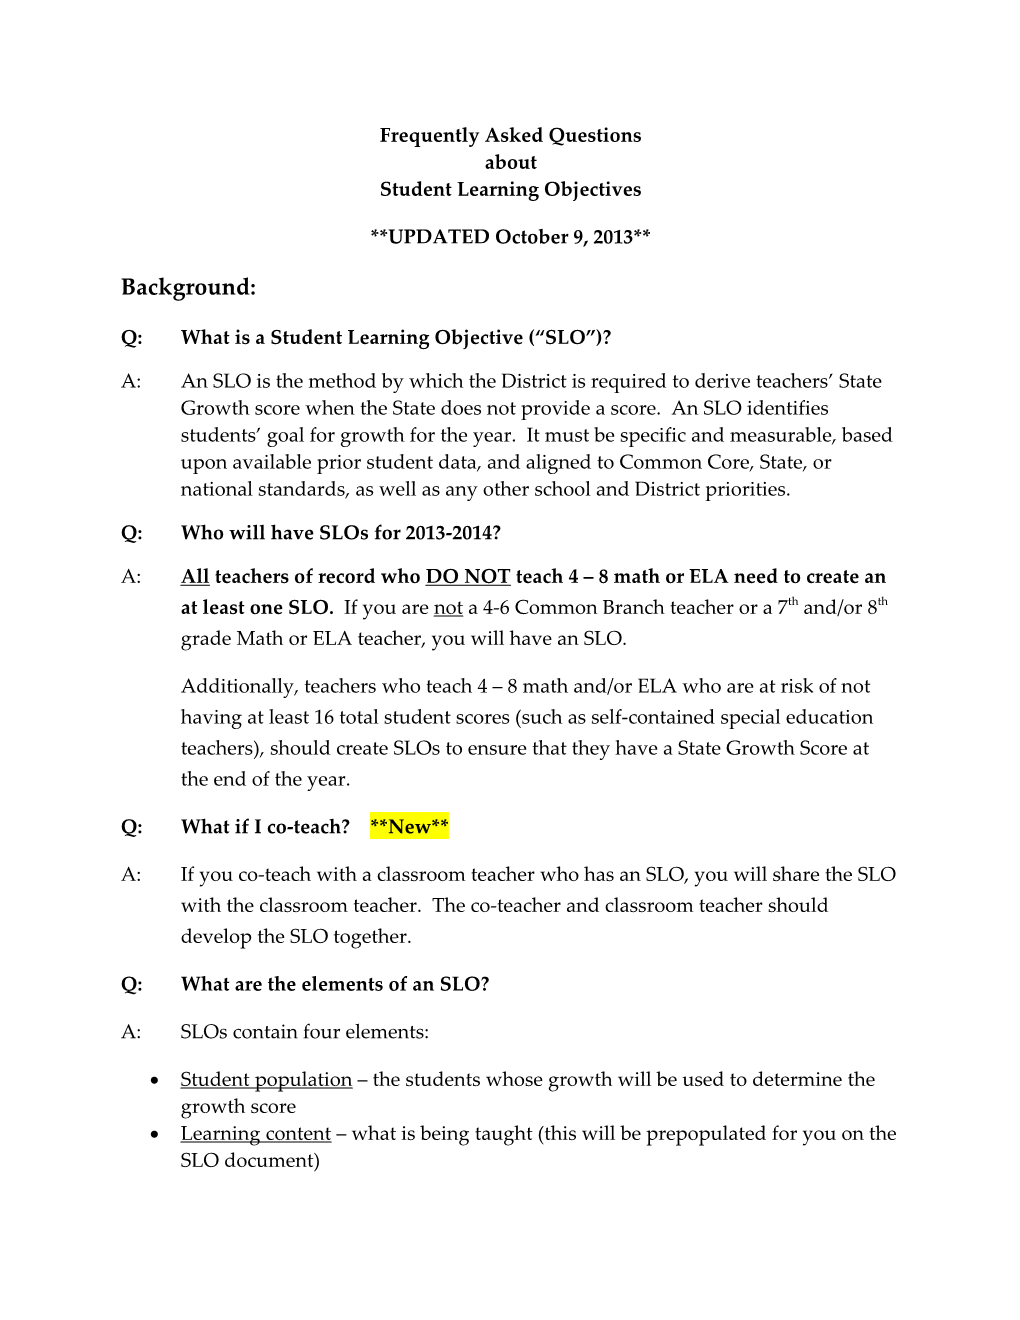 Q:What Is a Student Learning Objective ( SLO )?